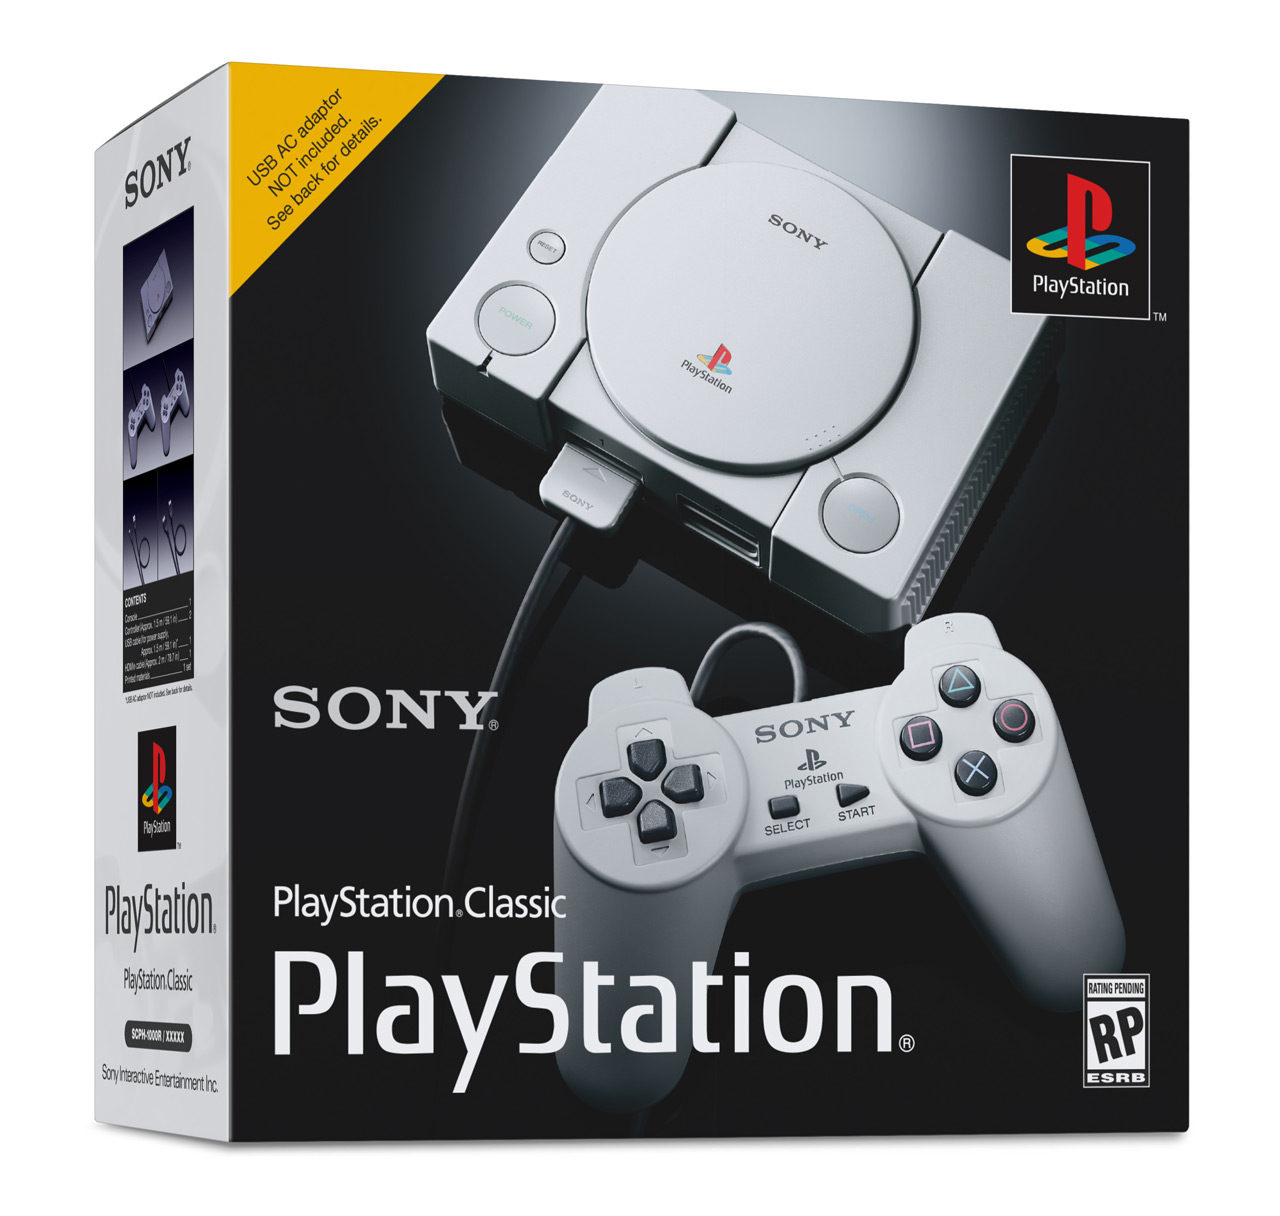 Sony reveals the PlayStation Classic, a 